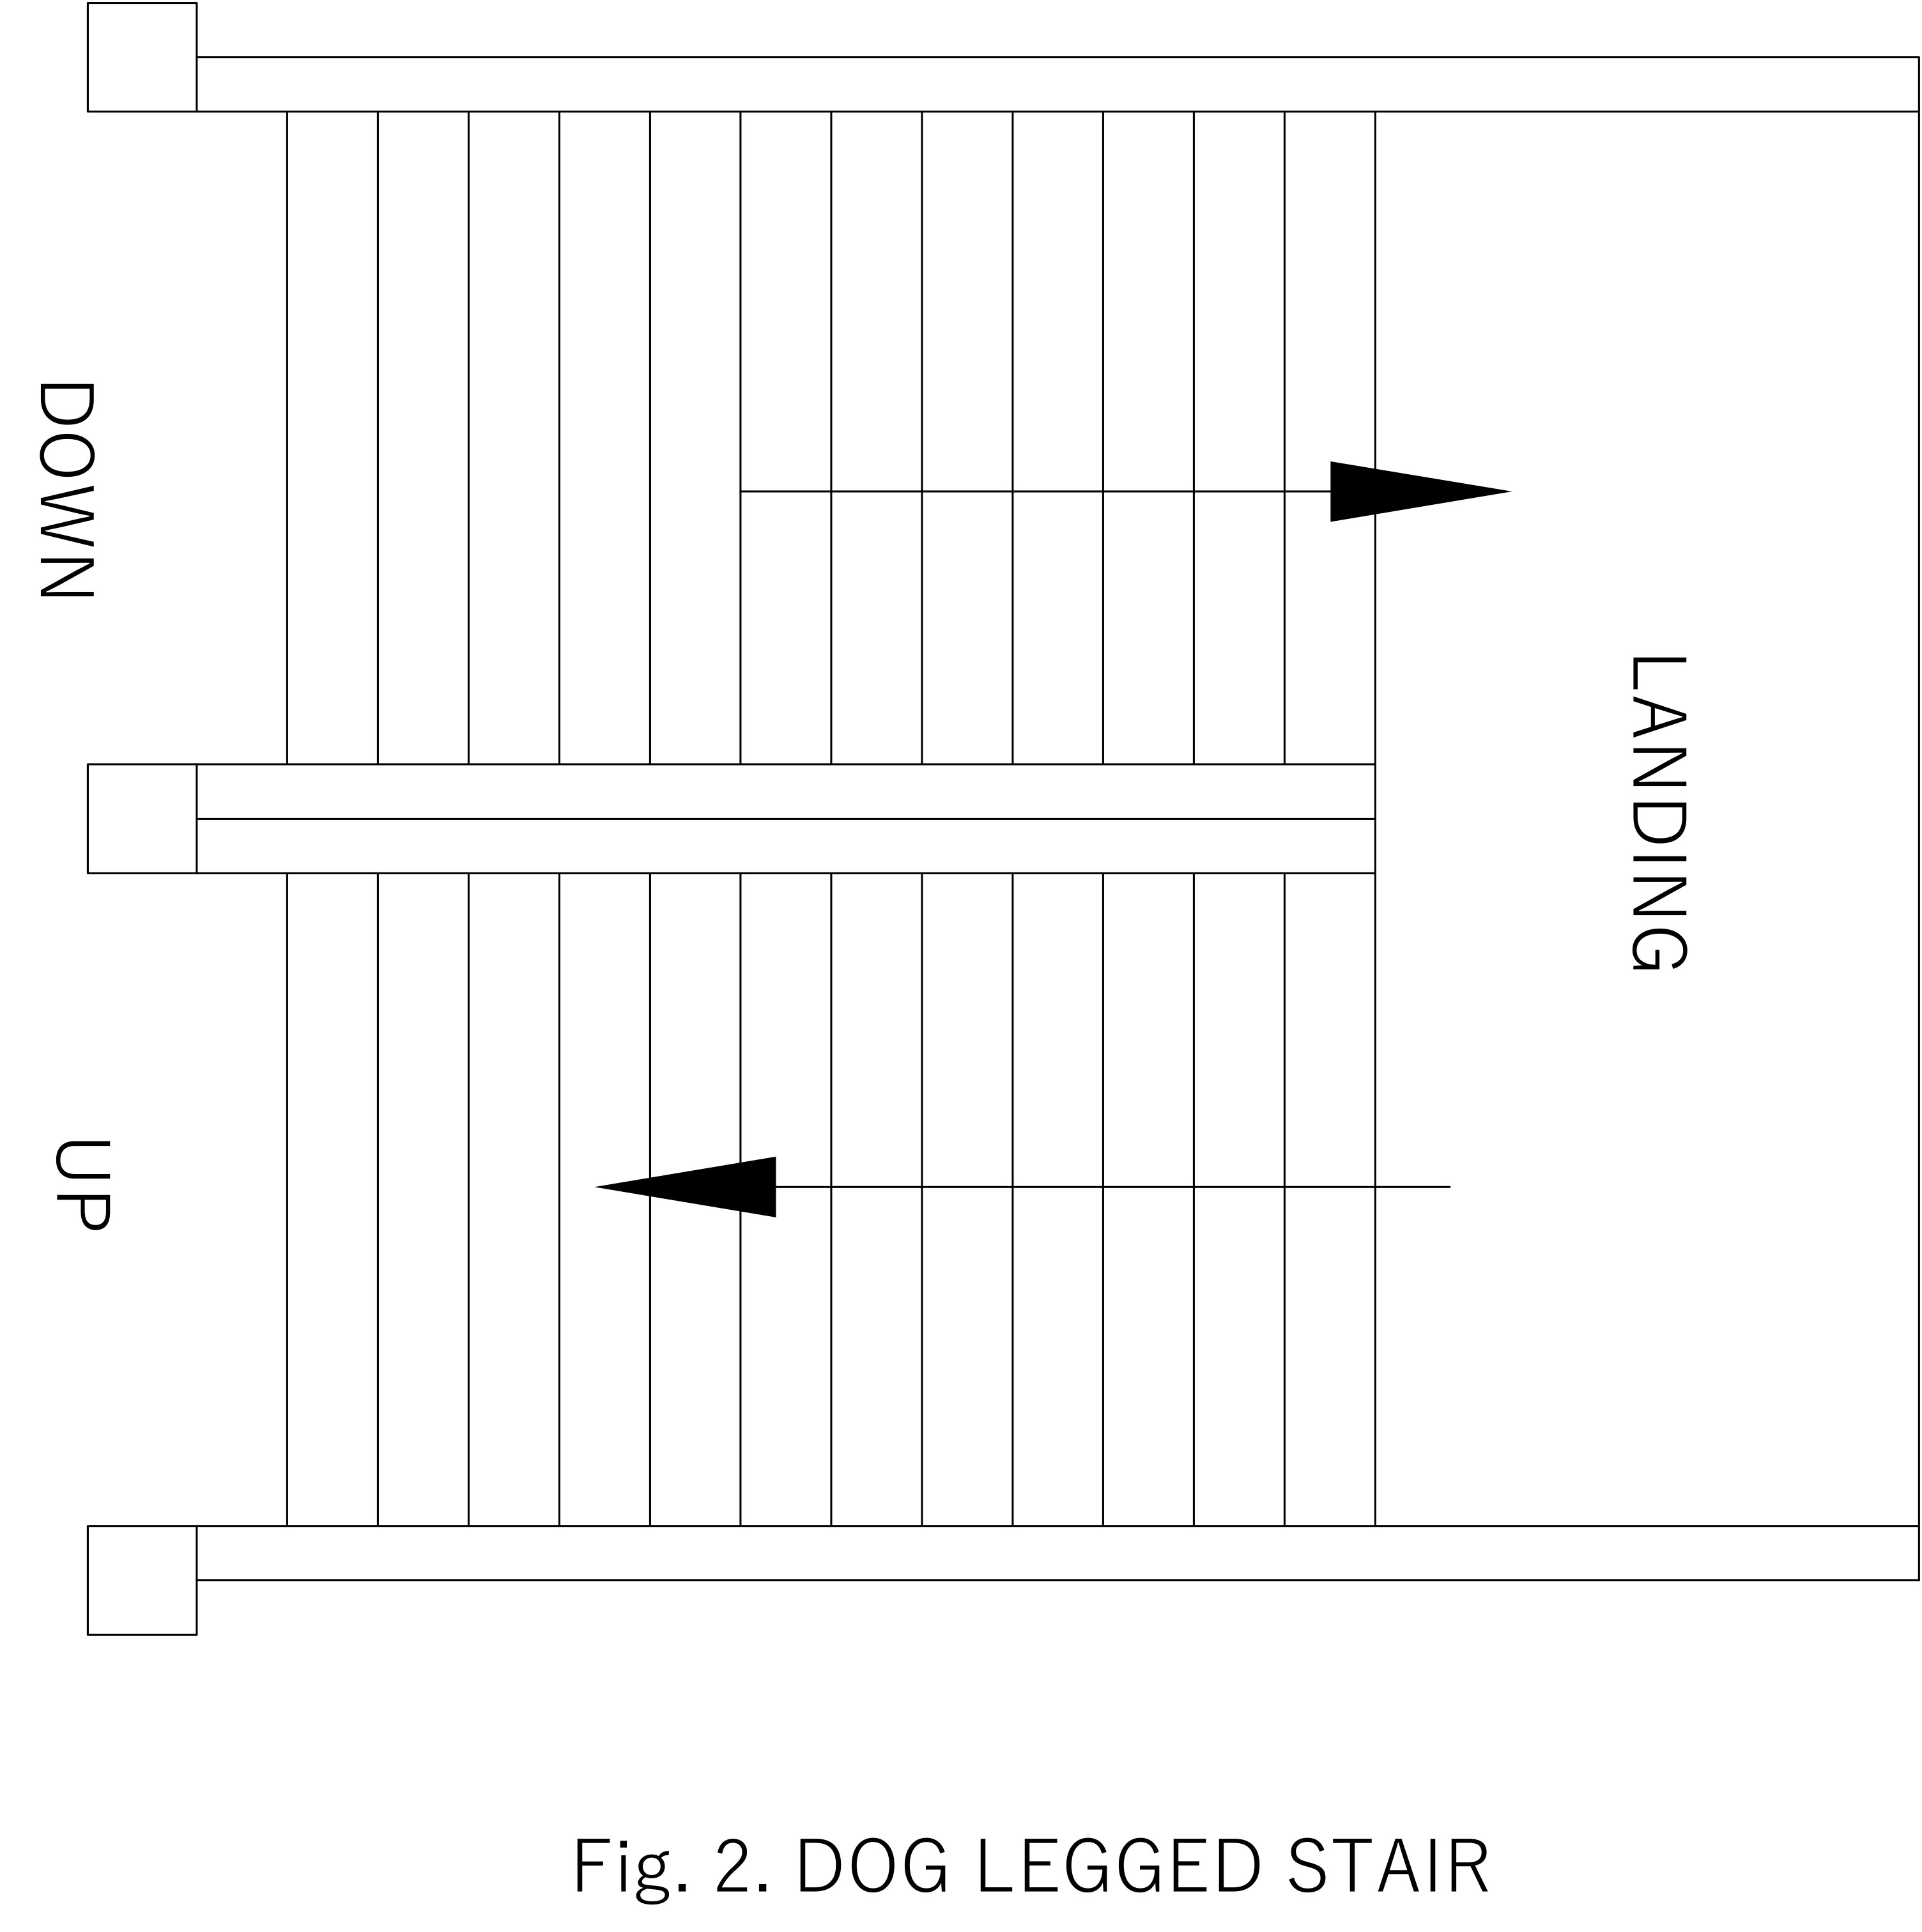 Types of staircases: Dog legged type stair